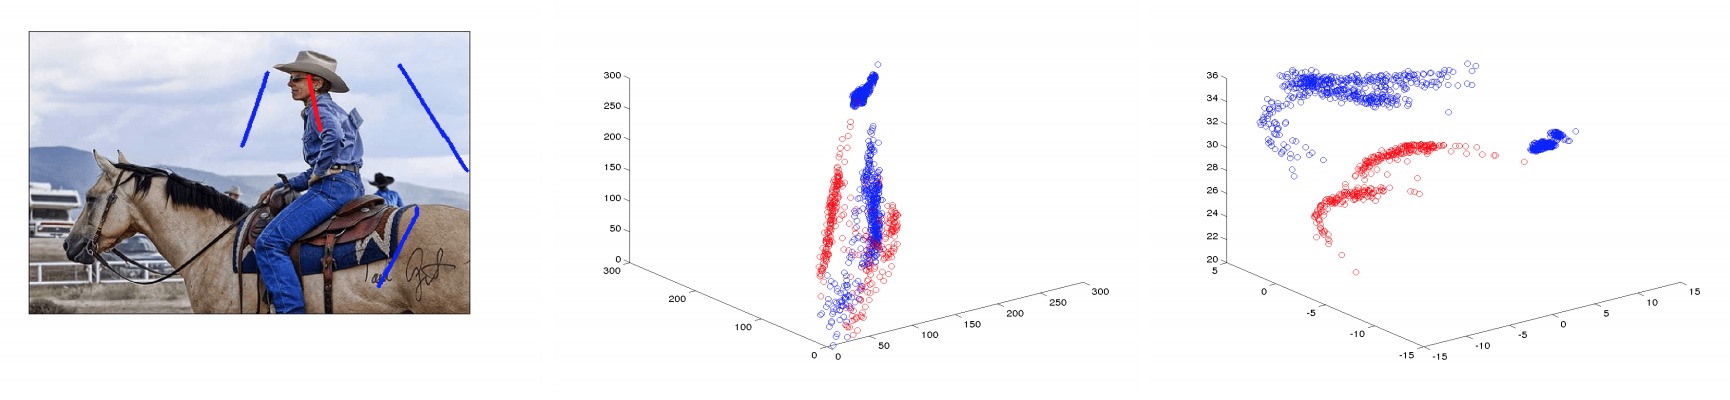 The effect of discriminative embedding. Left: Image with provided user scribbles. Red for FG and blue for BG. Middle: 3D plot of the RGB channels for the provided scribbles. The scribbles are mixed in the RGB color space. Right: 3D plot of the first 3 dimensions of the our discriminative embedding. The color modalities present in the scribbles are preserved. Remark that the FG has two modalities namely skin color and jeans. Also, the BG has two modalities the sky and horse body.